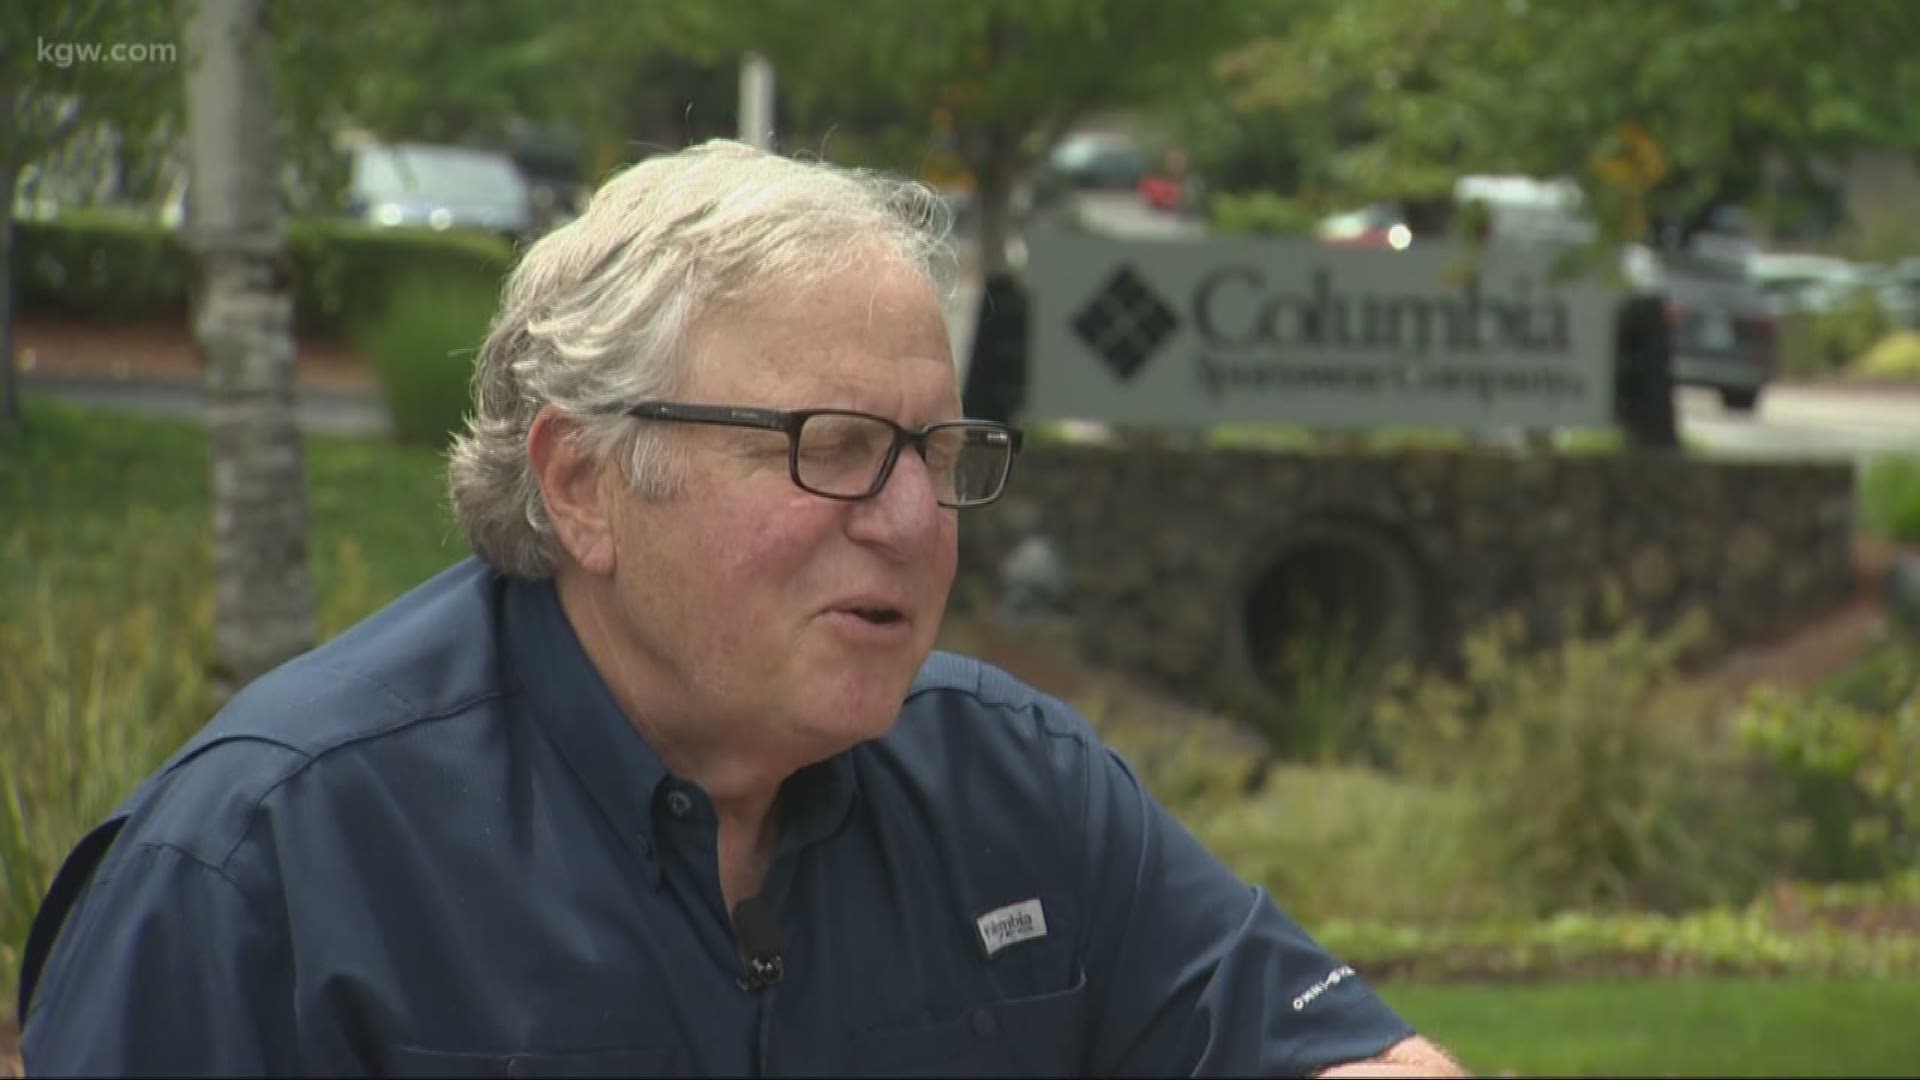 Columbia CEO pays for trash pickup